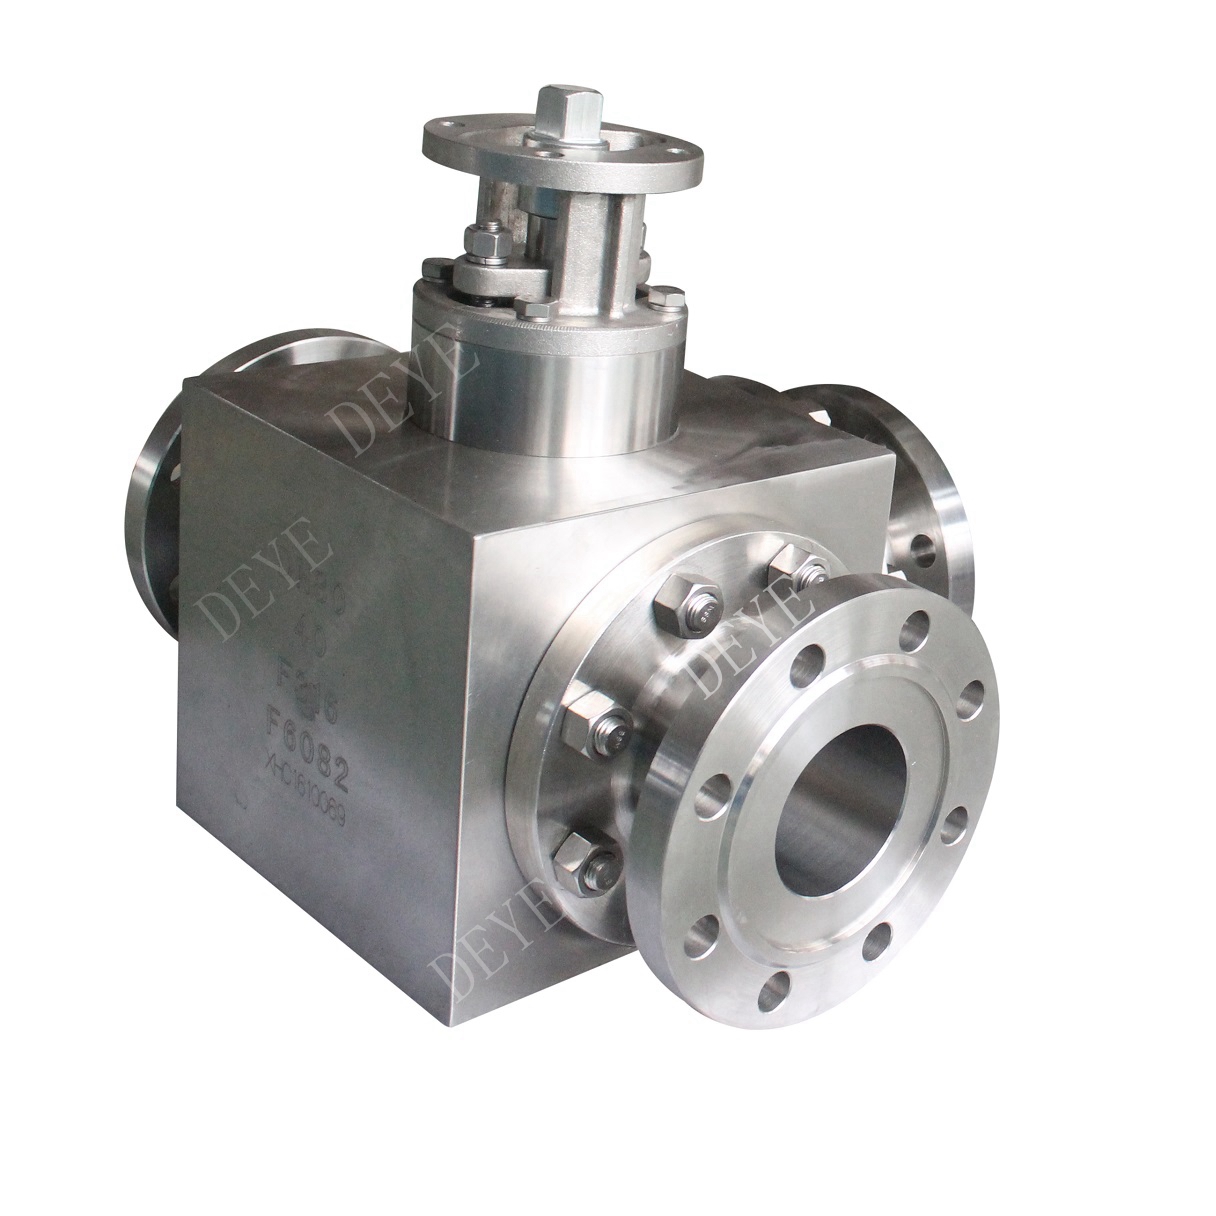  300LBS stainless steel 3-way ball valve with Flanged ends